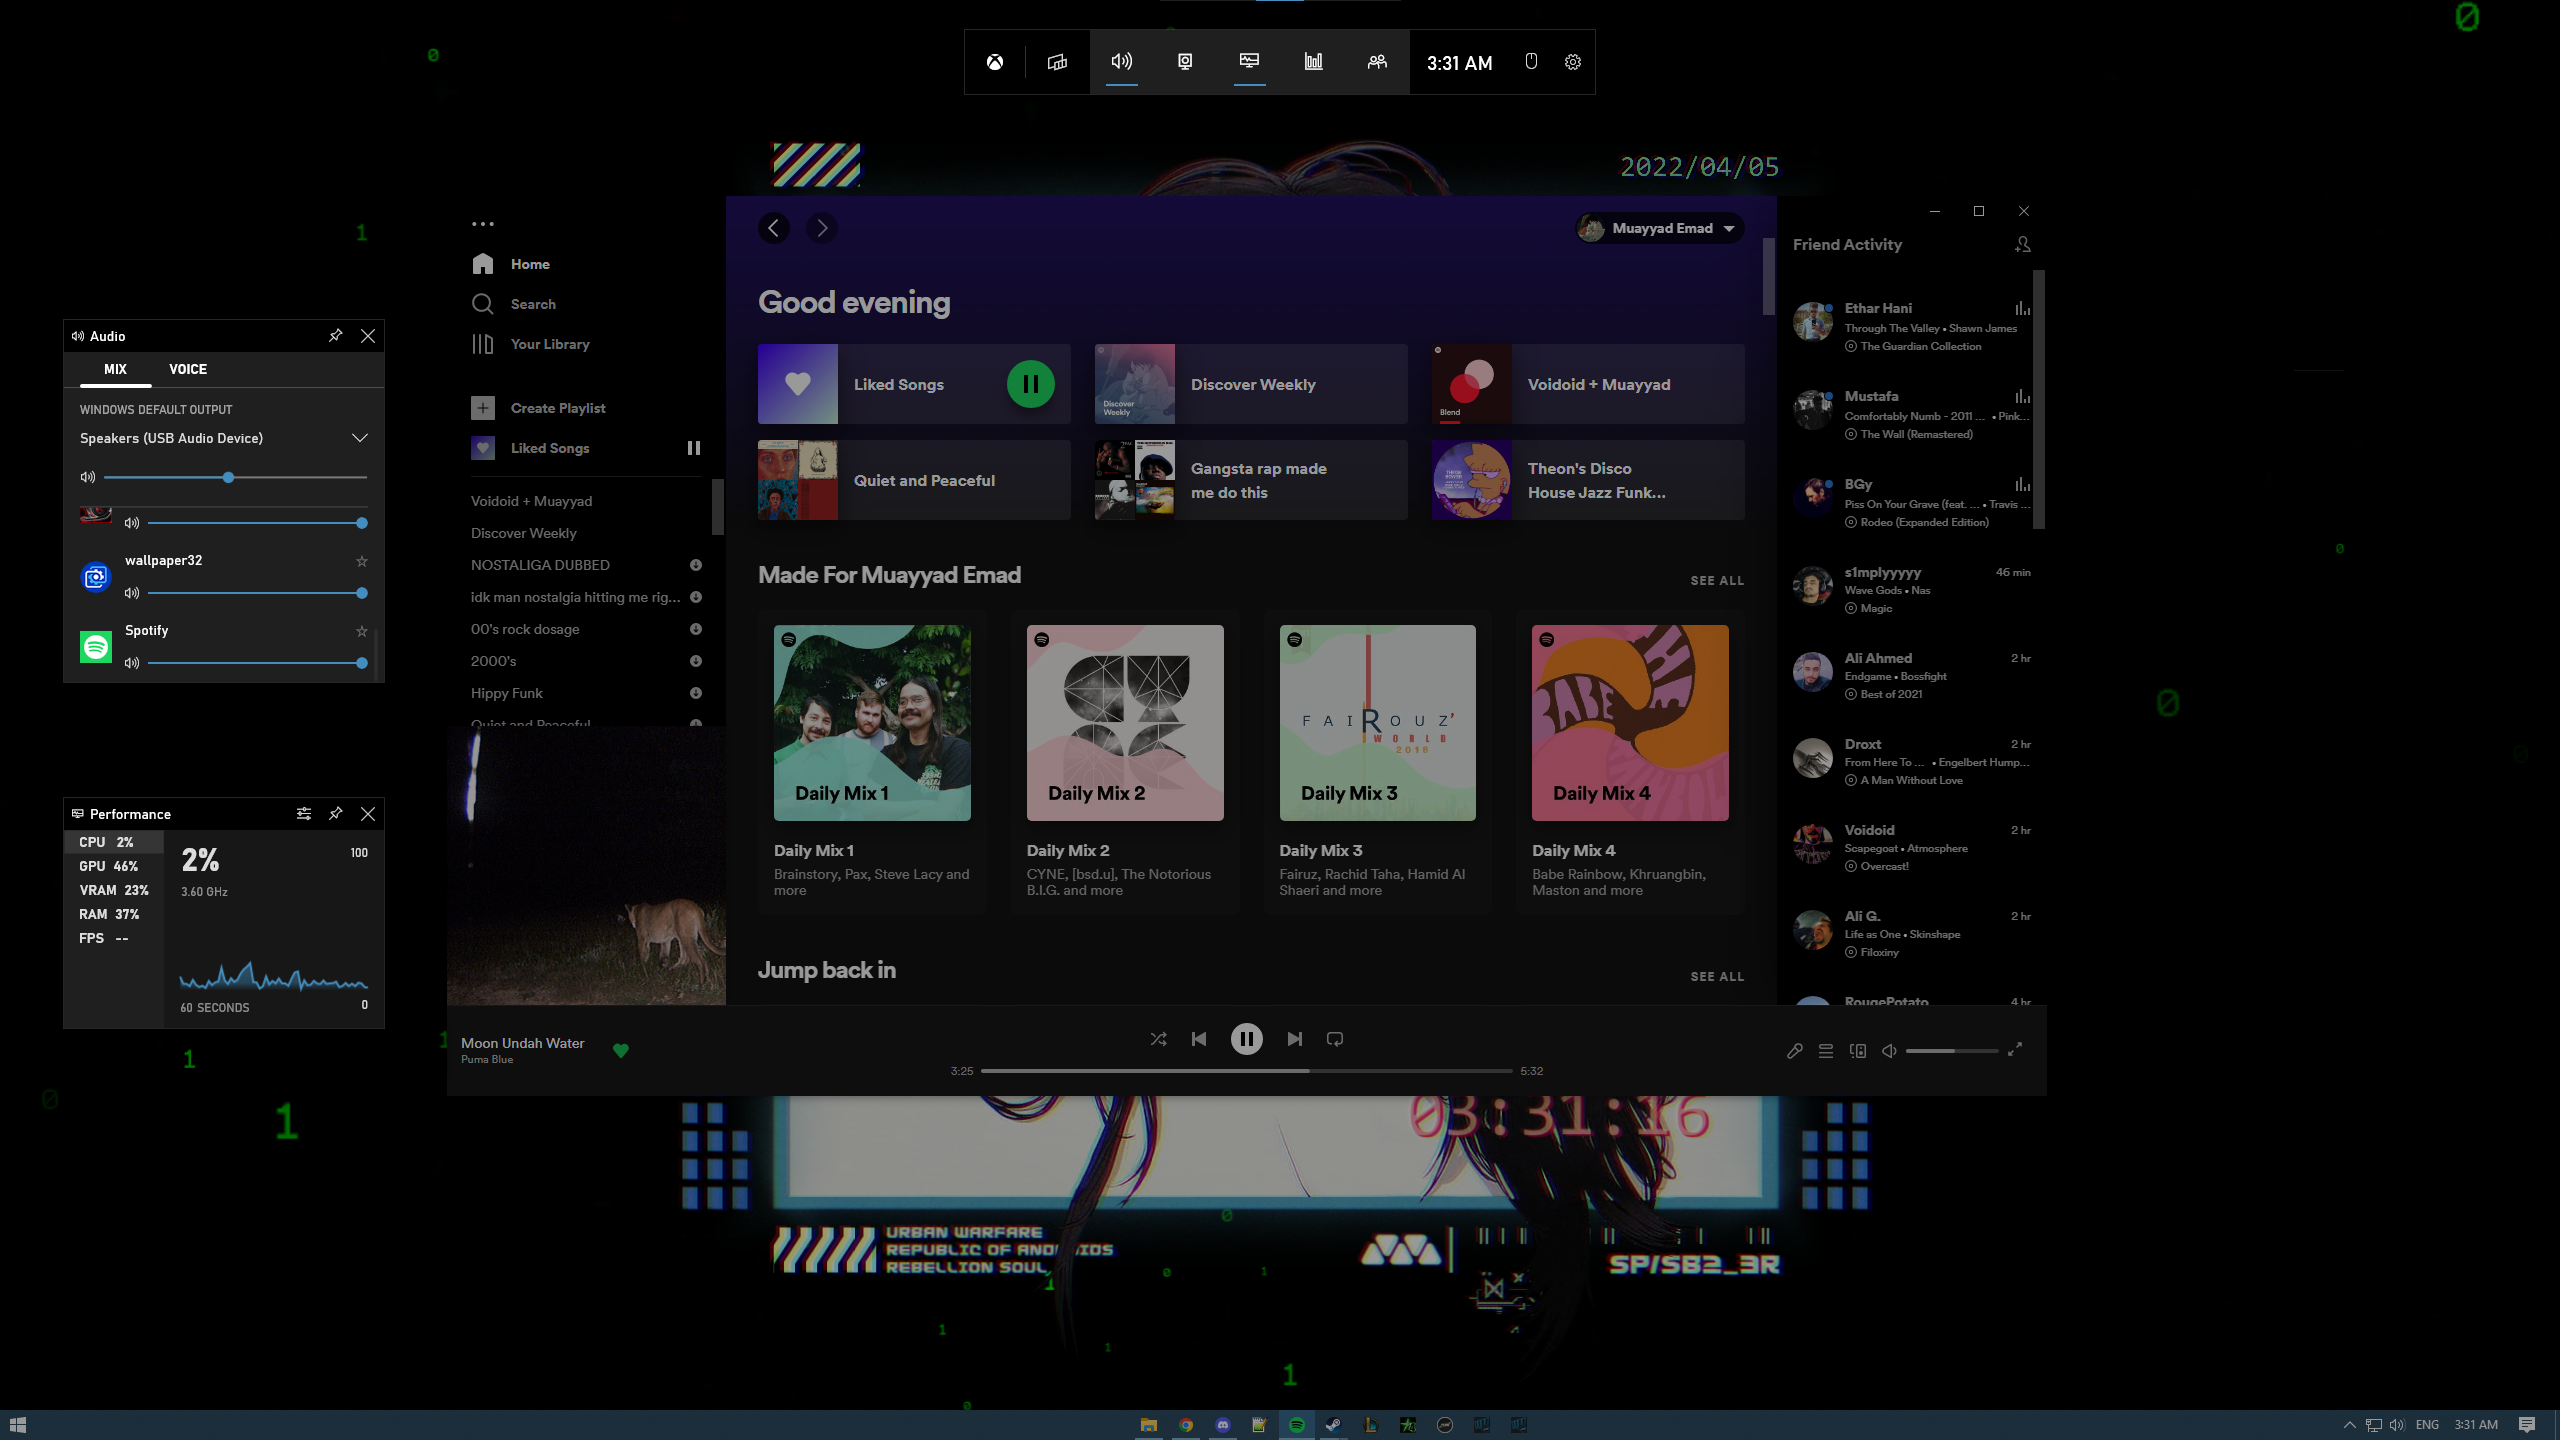 Spotify Xbox Game Bar: Methods to Play and Fixes to Not Working